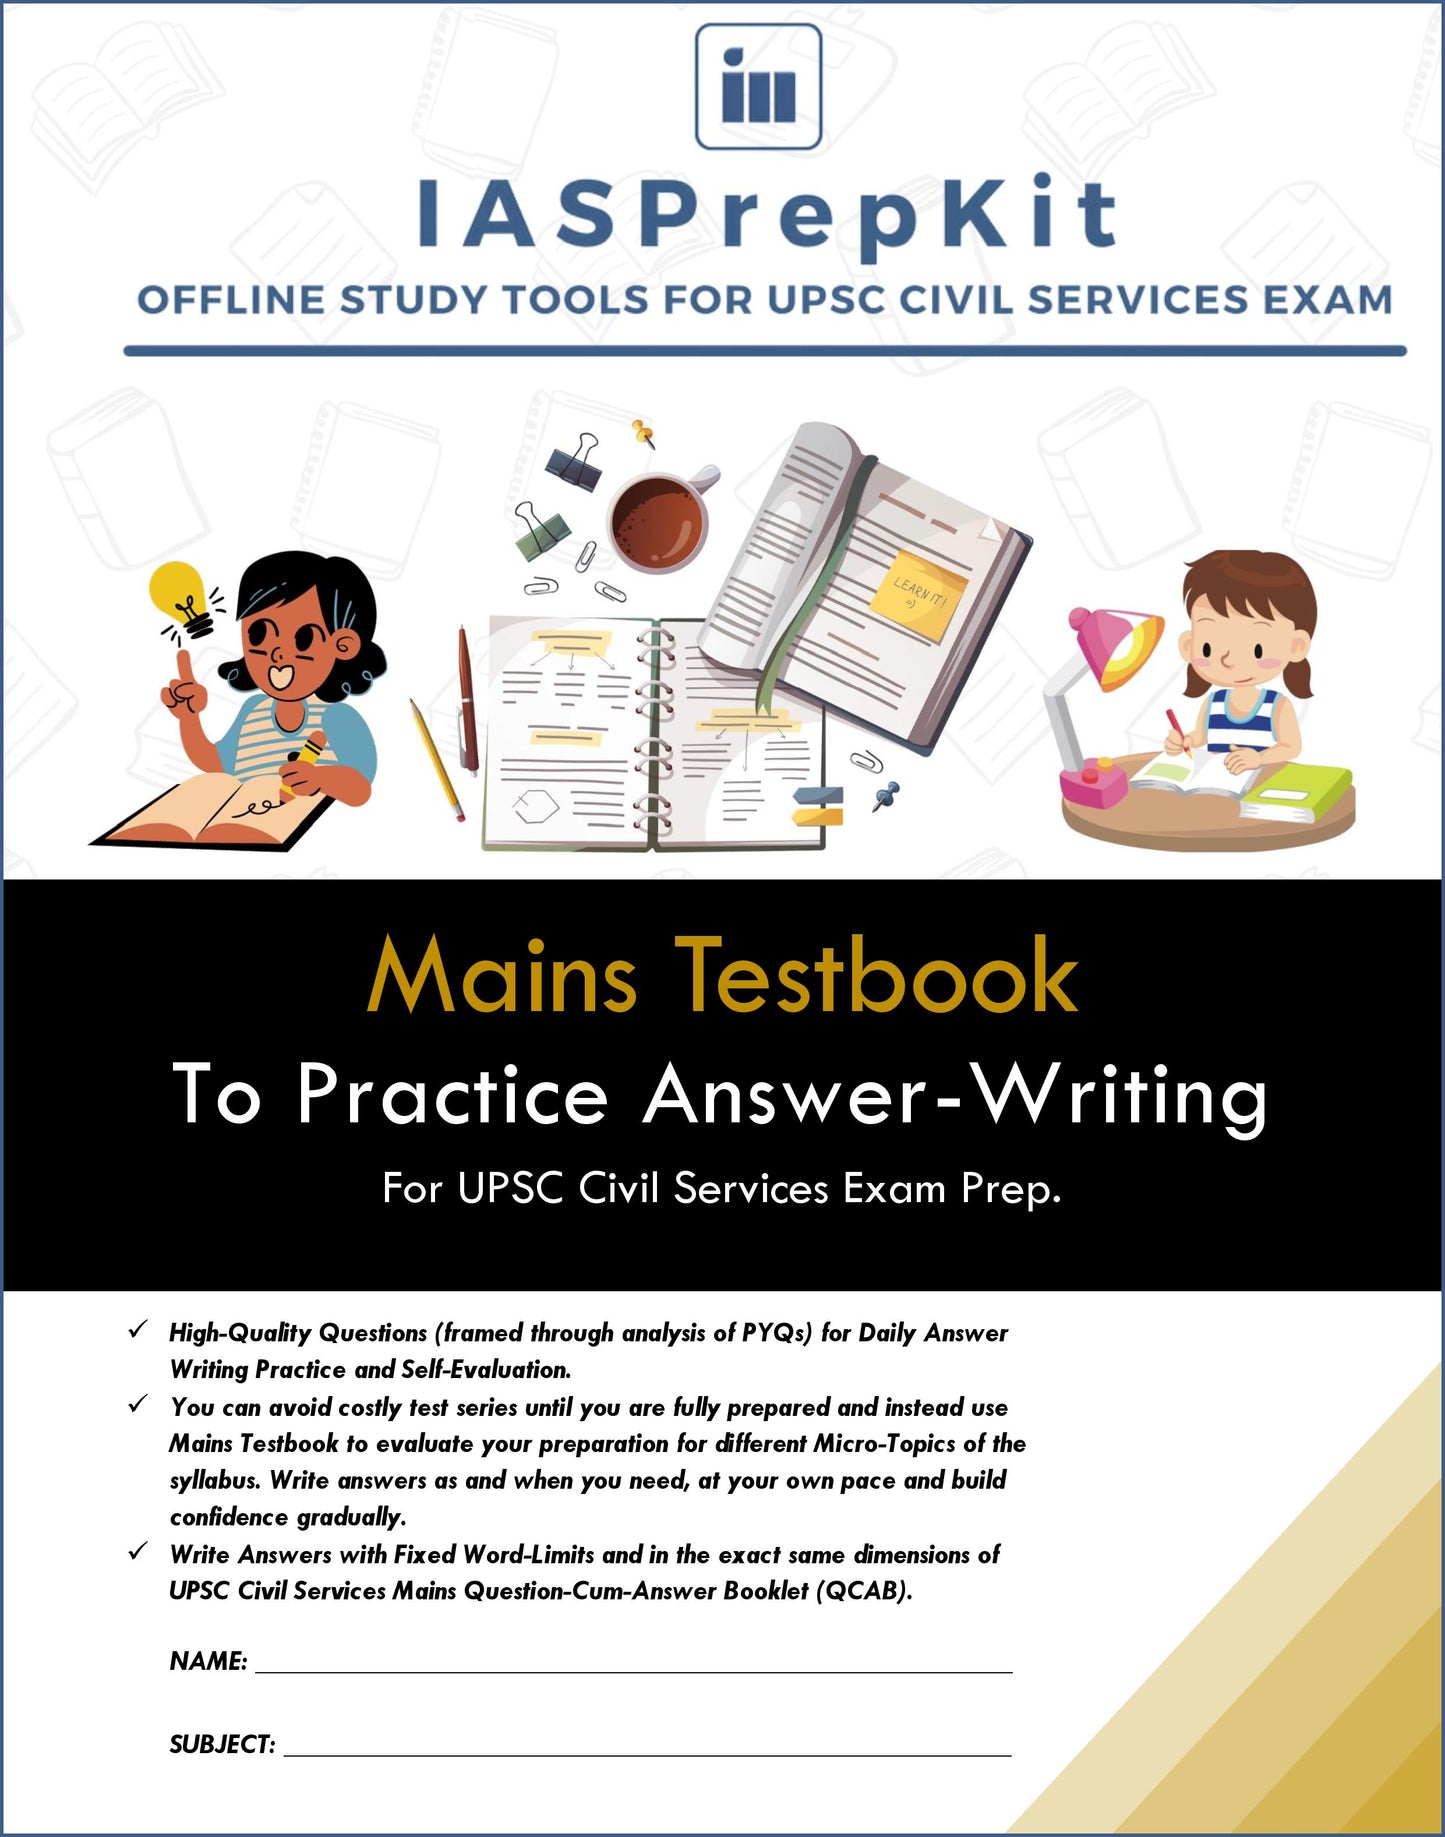 GS 1 - Mains Testbook to Practice Daily Answer-Writing & Self-Evaluation for UPSC Civil Services Exam Prep. (140 Questions)